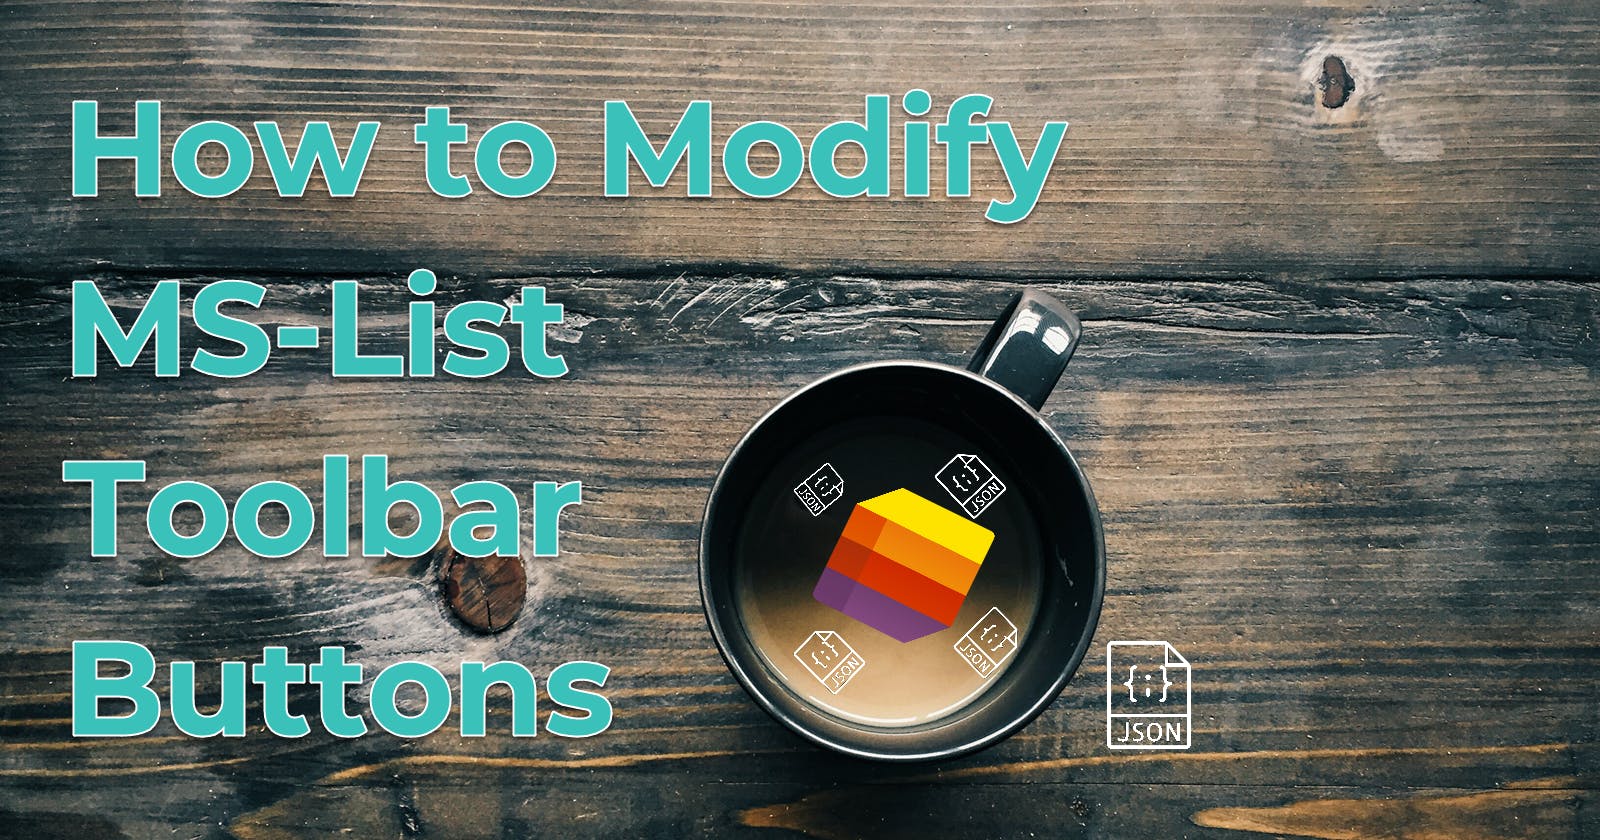 How to Modify MS-List Toolbar Buttons